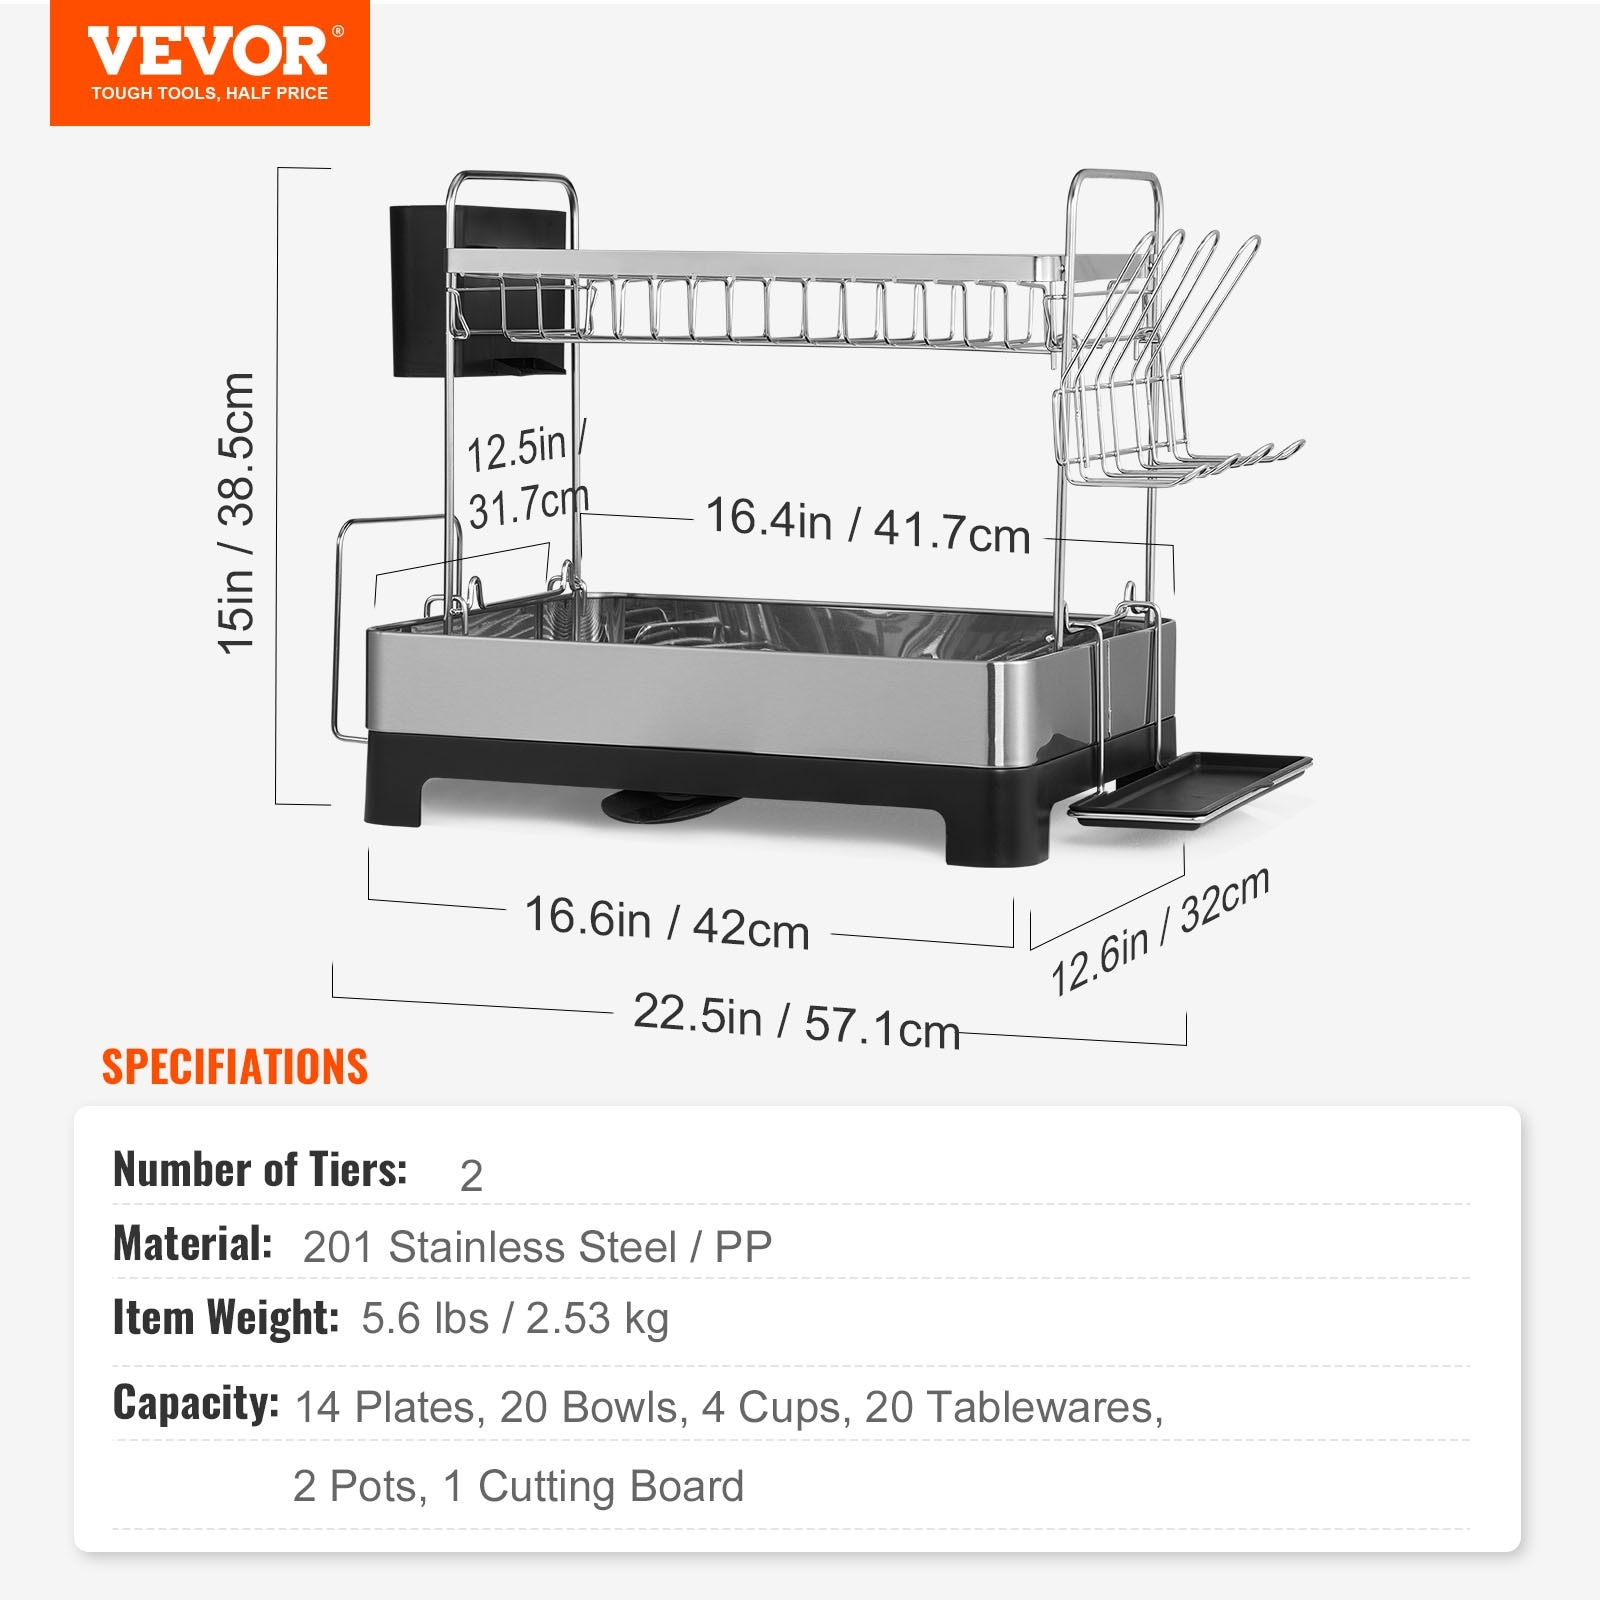 https://ak1.ostkcdn.com/images/products/is/images/direct/d99bc92b1c951d27ad2e0431385f0d182a445c8d/VEVOR-2-Tier-Large-Dish-Drying-Rack-Rustproof-Stainless-Steel-Over-The-Sink-with-Drainboard-Cup-%26-Utensil-Holder.jpg